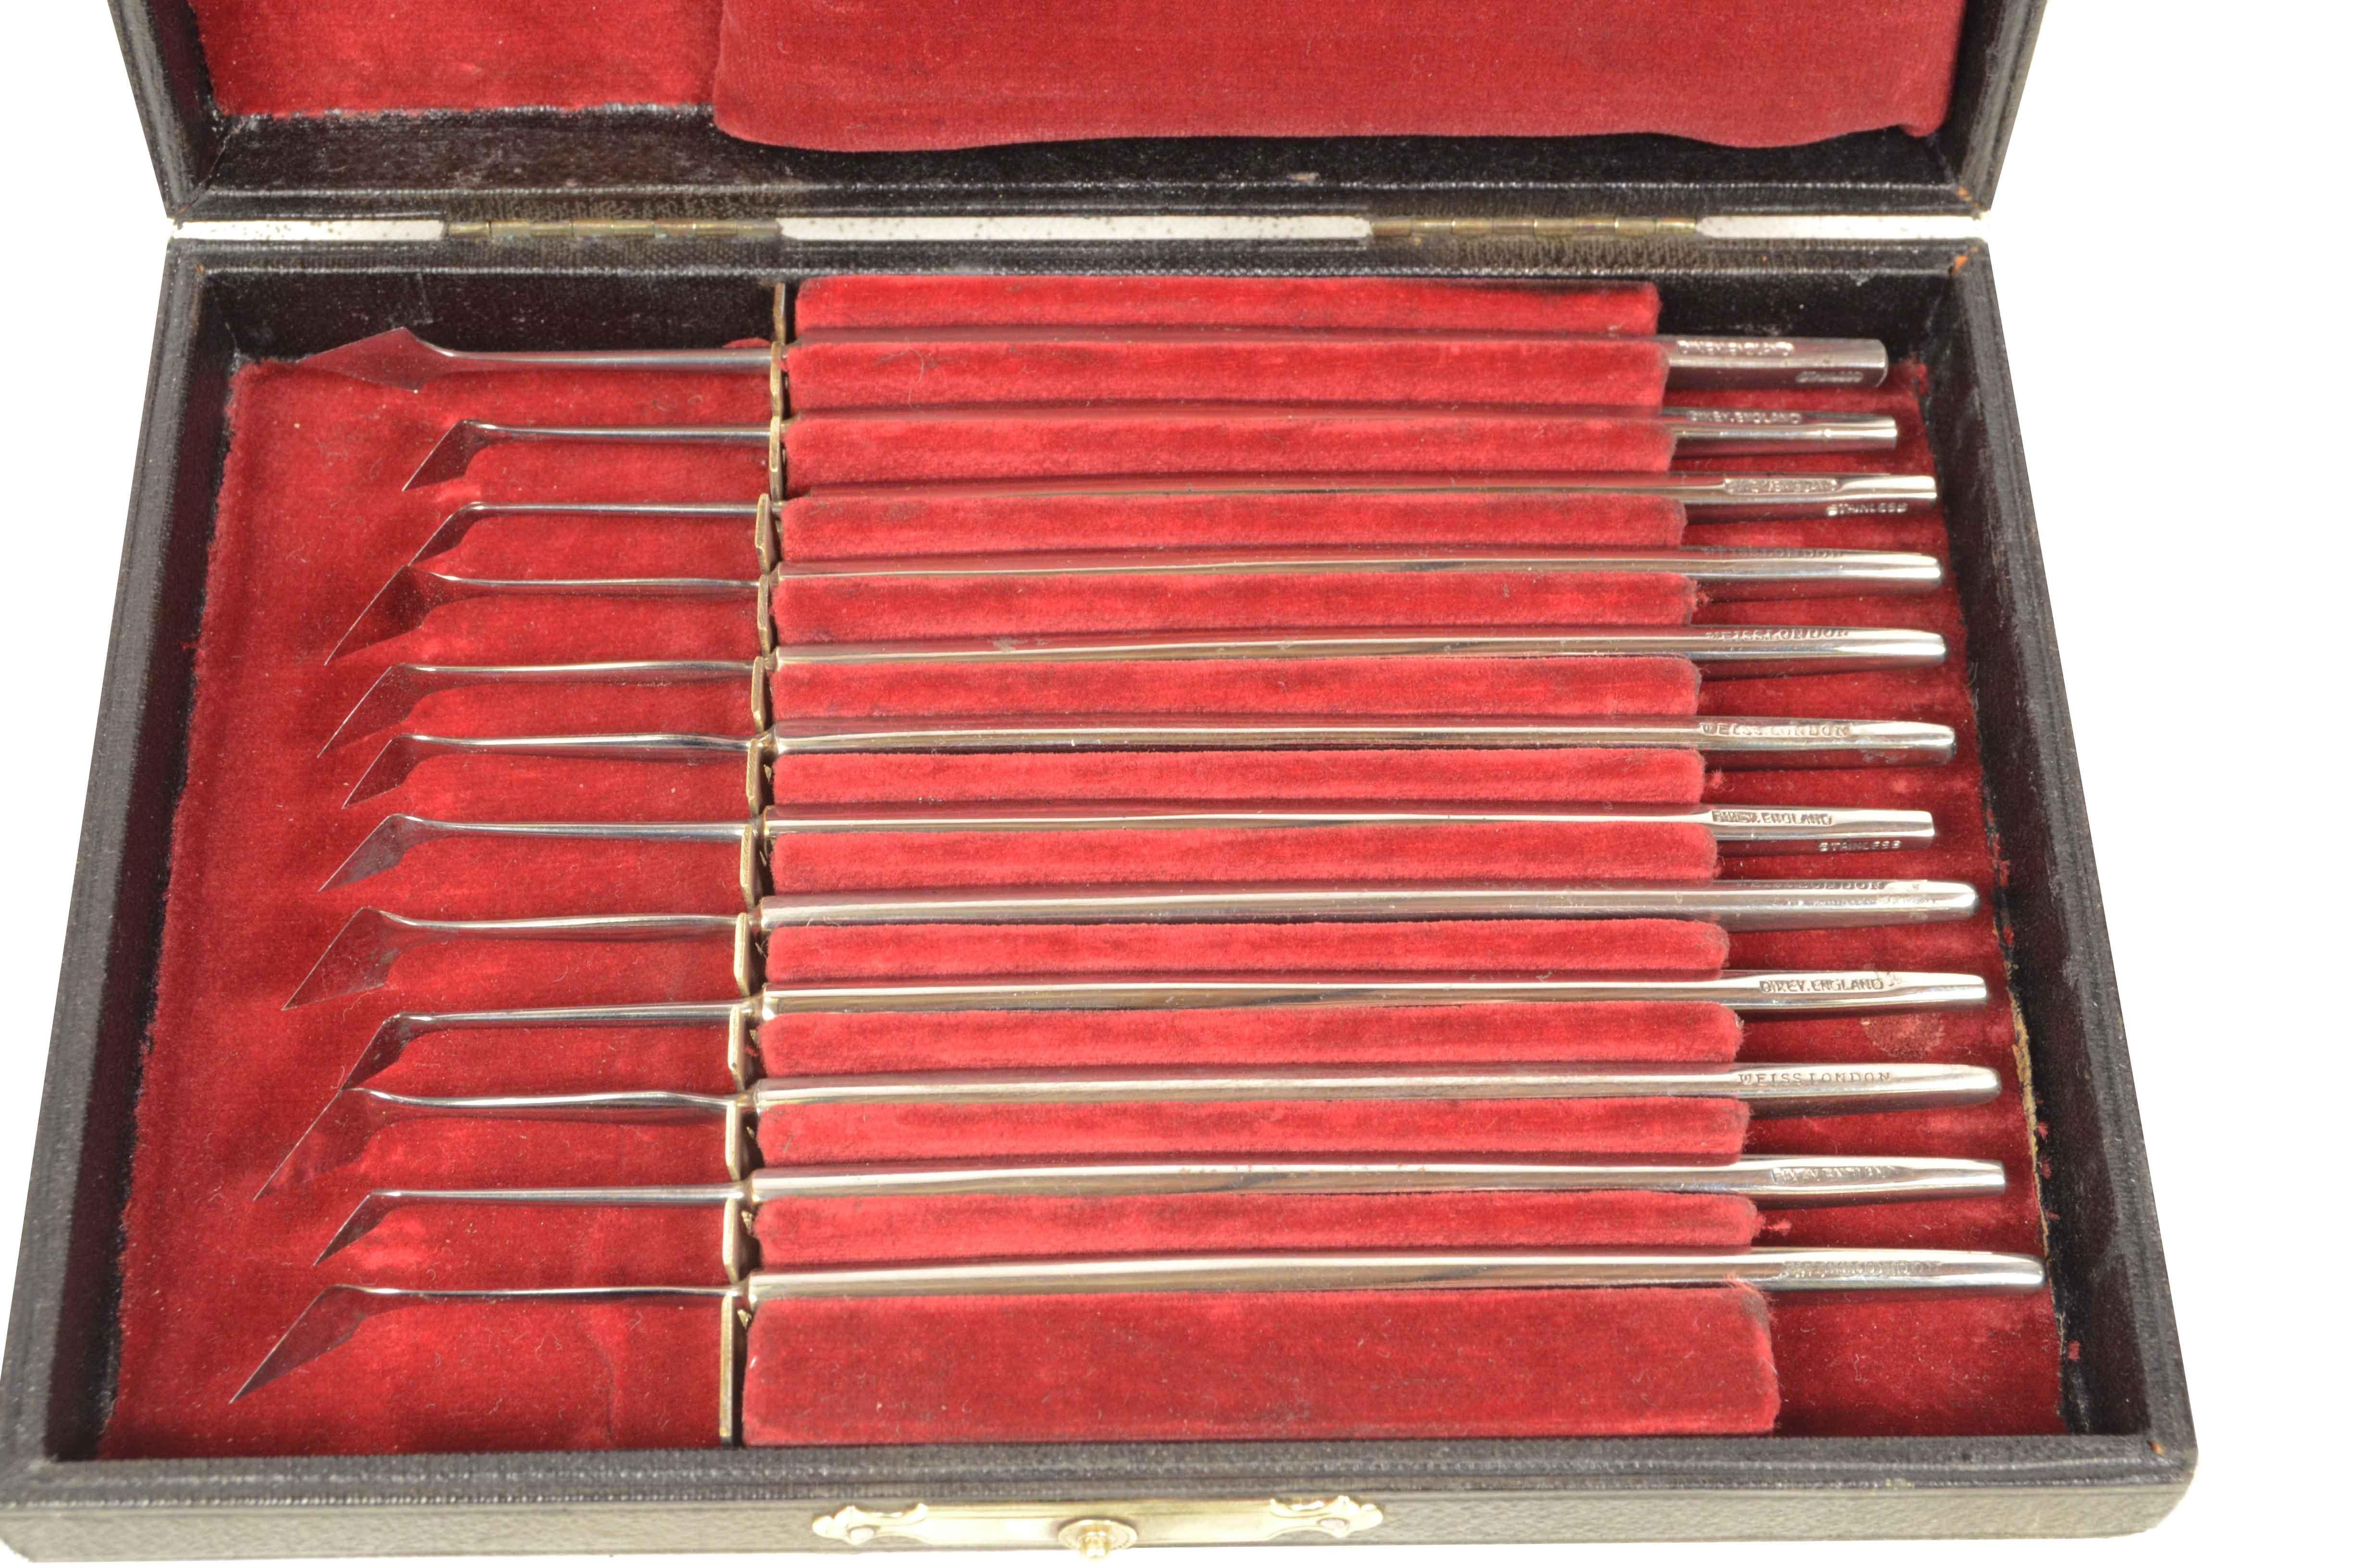 Ophthalmic steel surgery kit, signed J. Weiss & Son Ltd London and Dixey England, made in the end of XIX century circa, placed in its original wooden box covered with leather, red velvet interiors, brass closing hooks. 
Very good condition.